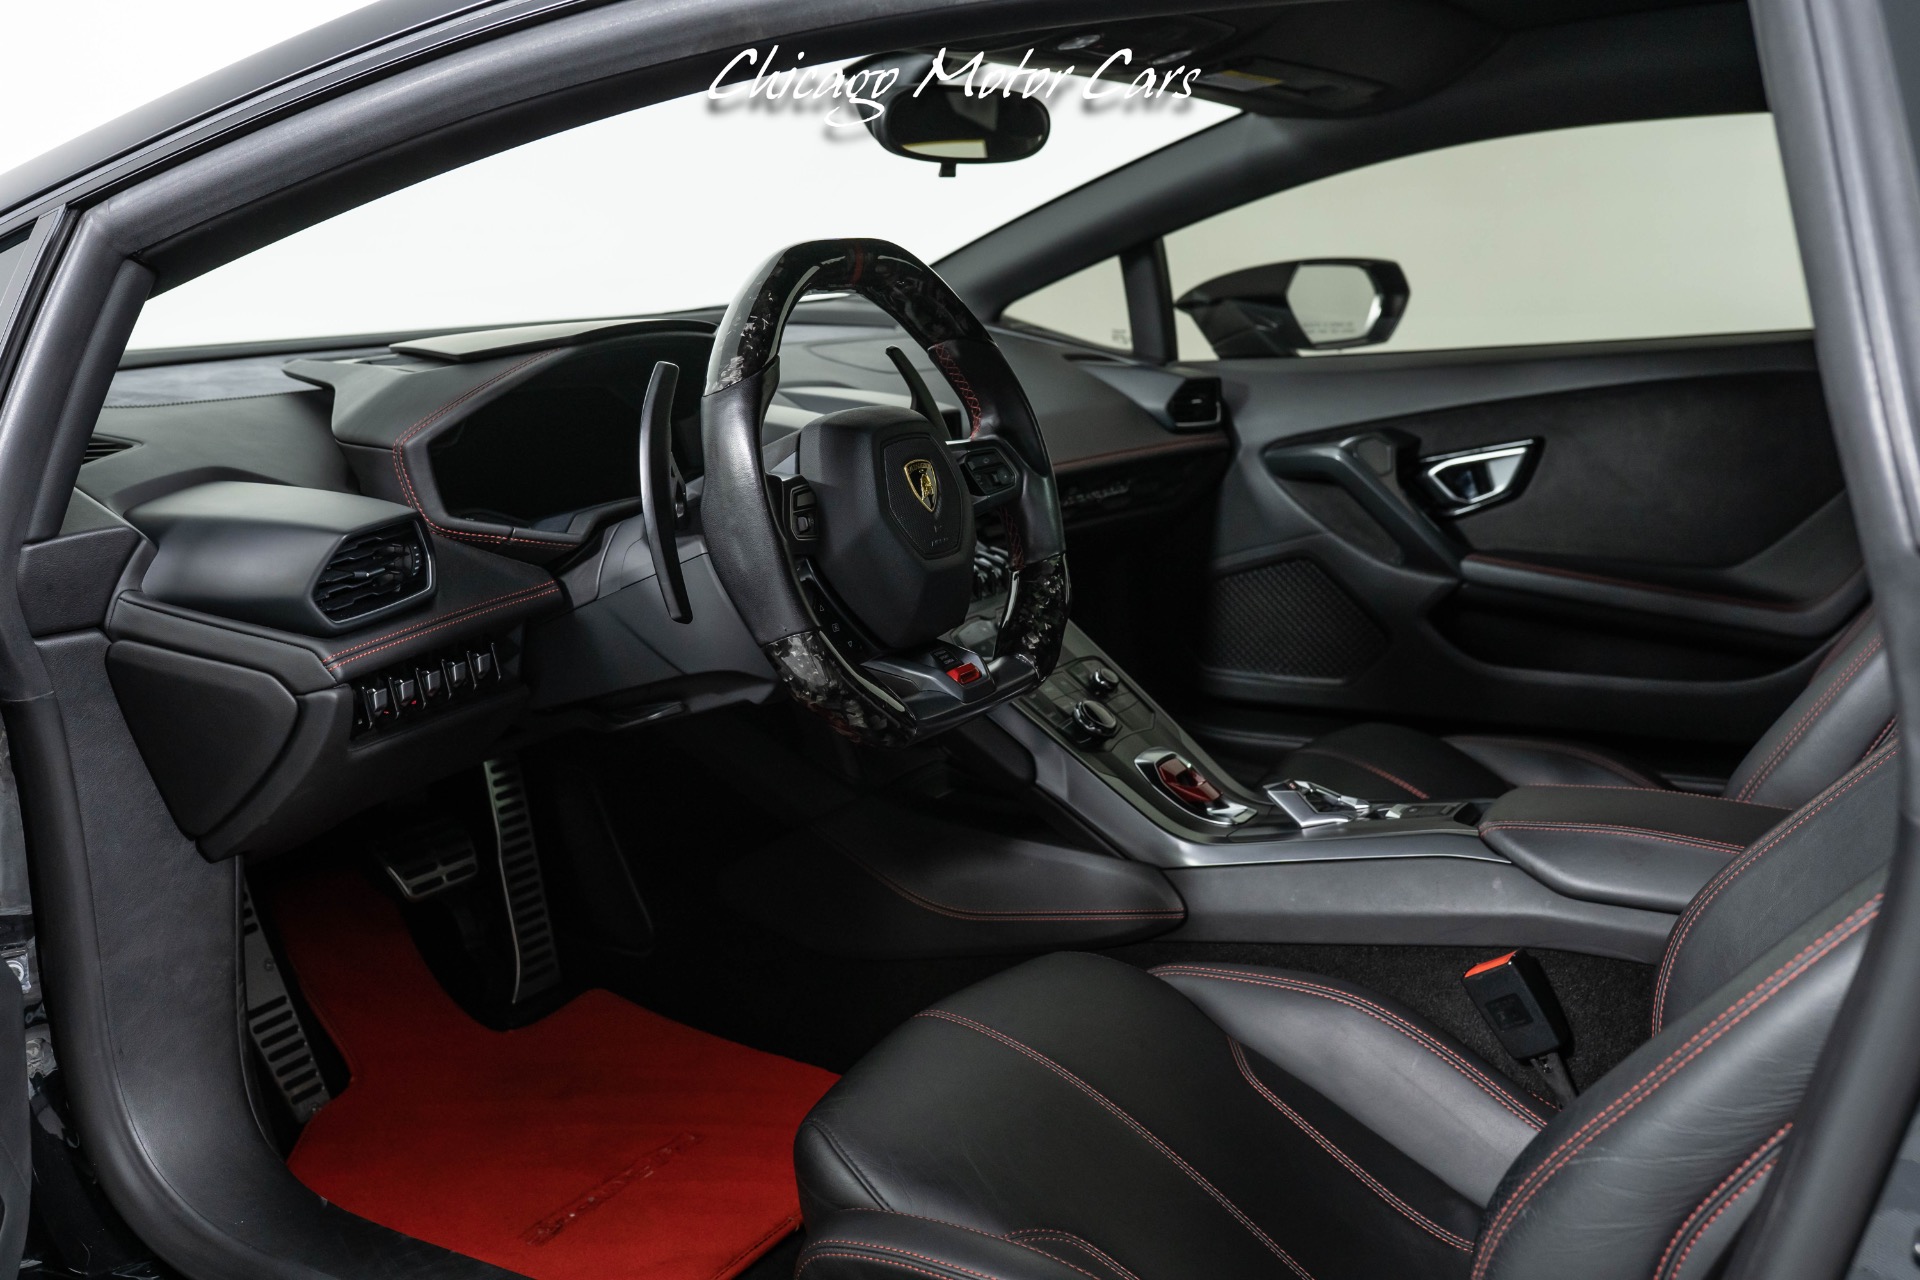 Used-2015-Lamborghini-Huracan-LP60-4-Coupe-Forged-Carbon-Fiber-Engine-Bay-Front-End-Lifter-Contrast-Stitching